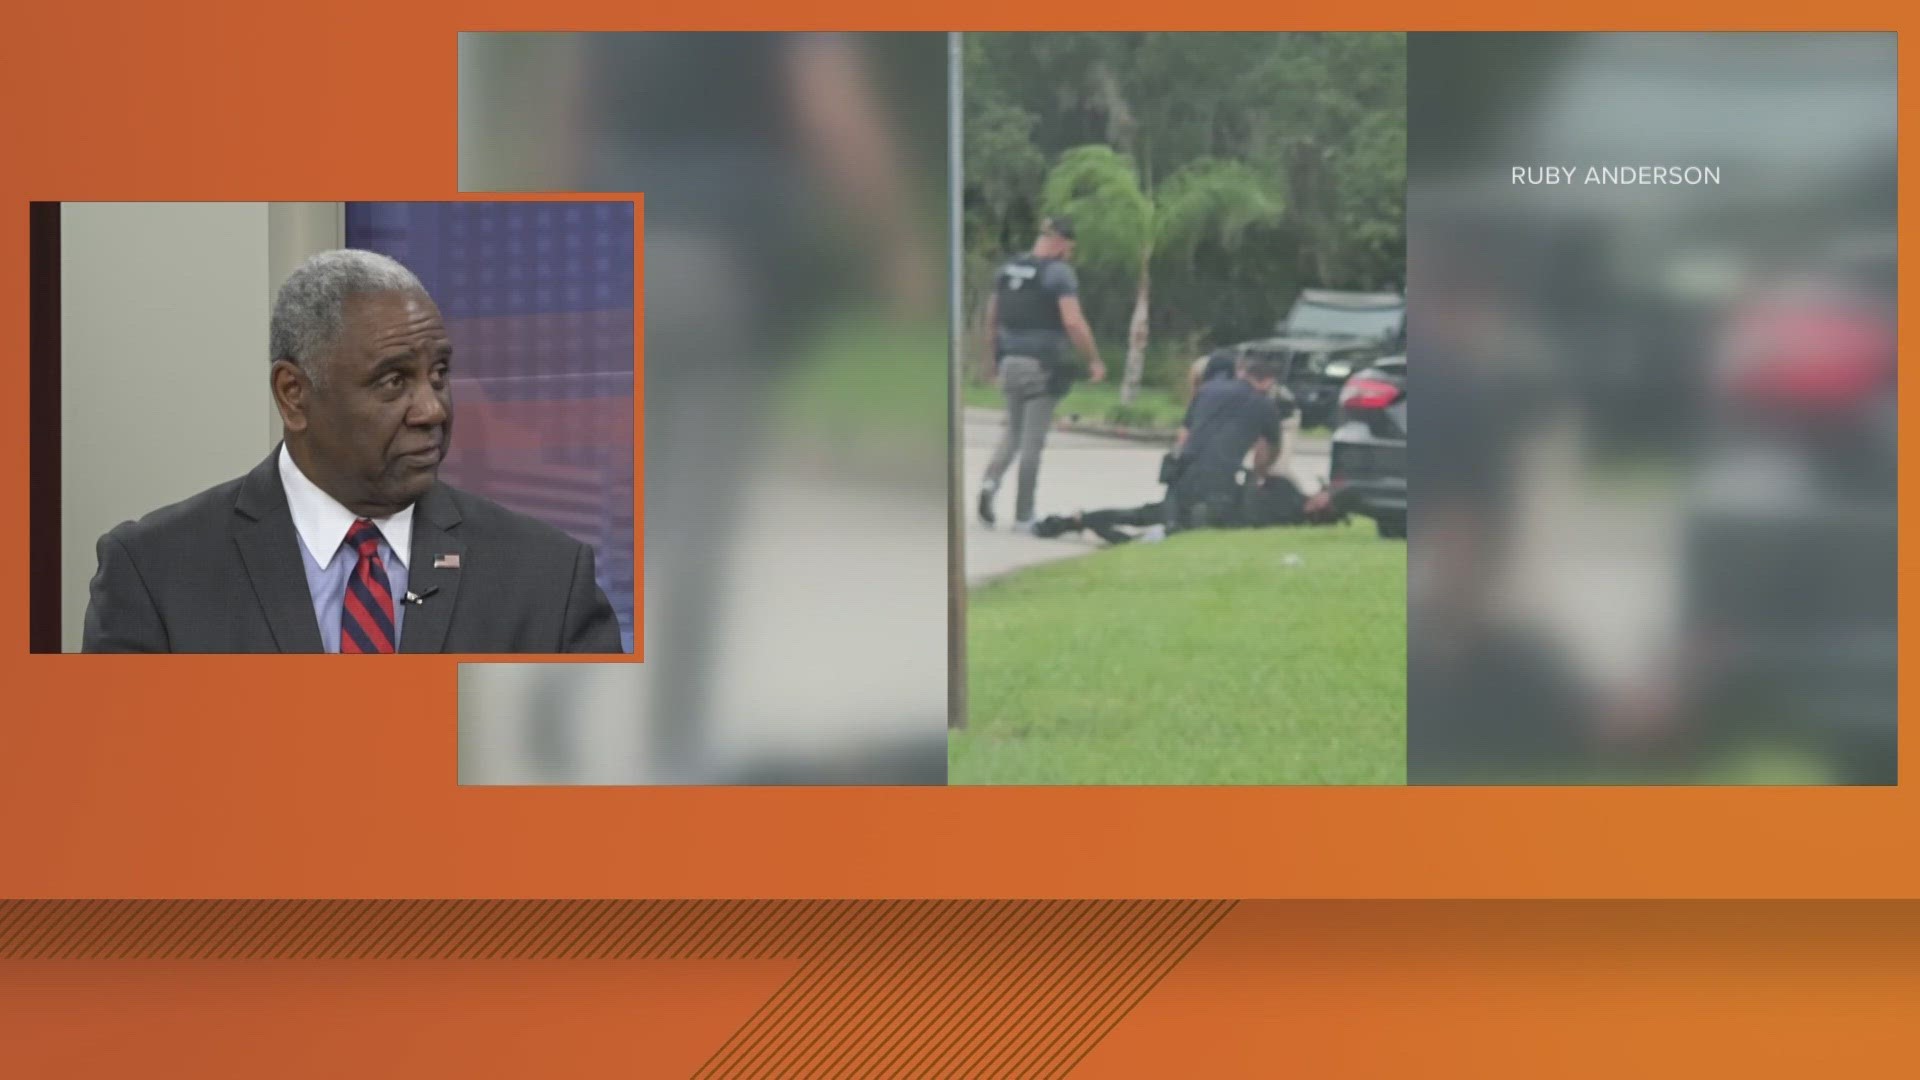 First Coast News Crime & Safety Analyst Ken Jefferson says JSO has a "microscope" on Garriga now after his arrest. Garriga fatally shot Jamee Johnson in 2019.